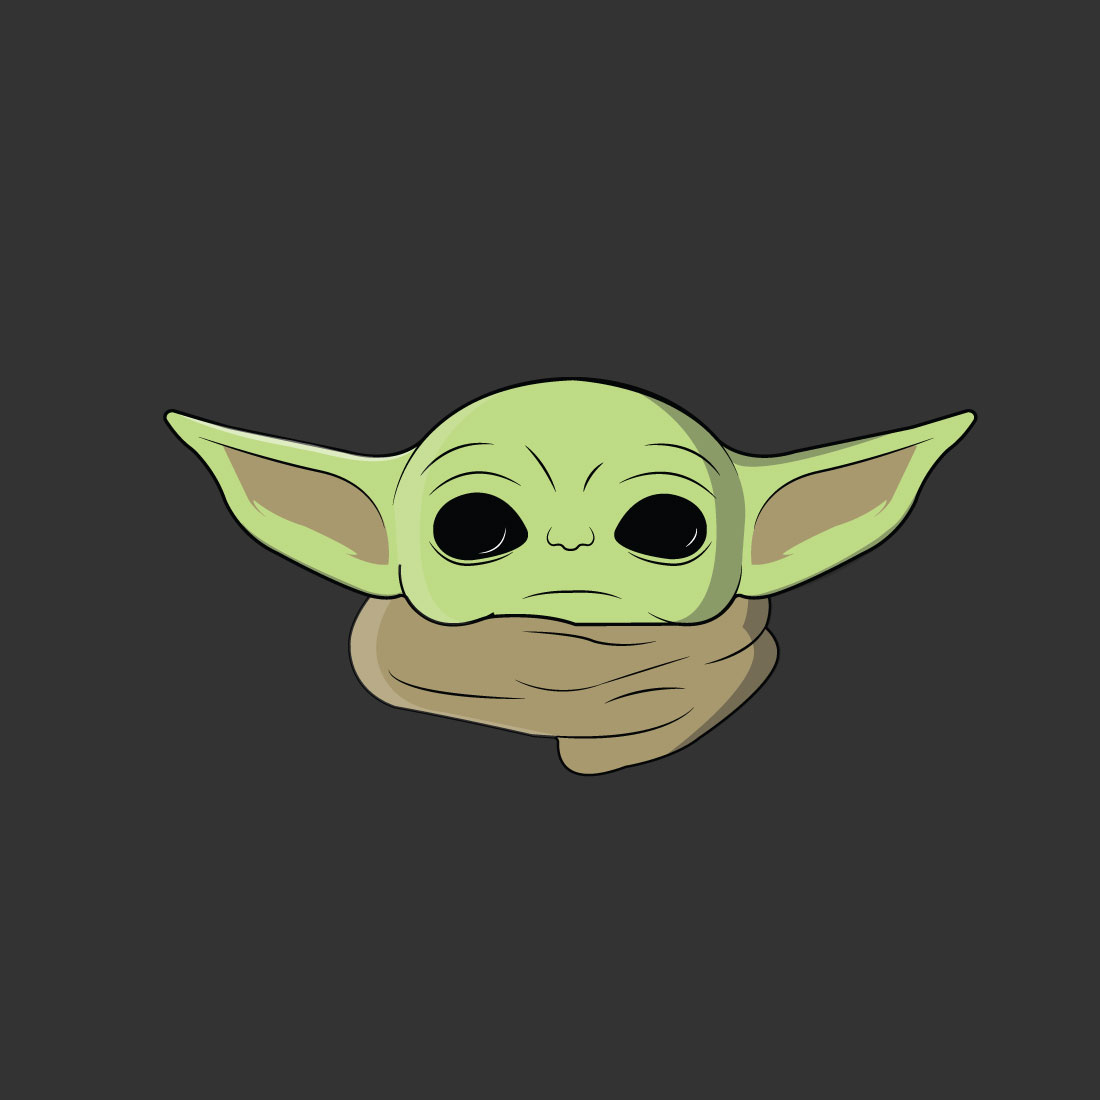 Yoda face from Star wars vector design cover image.